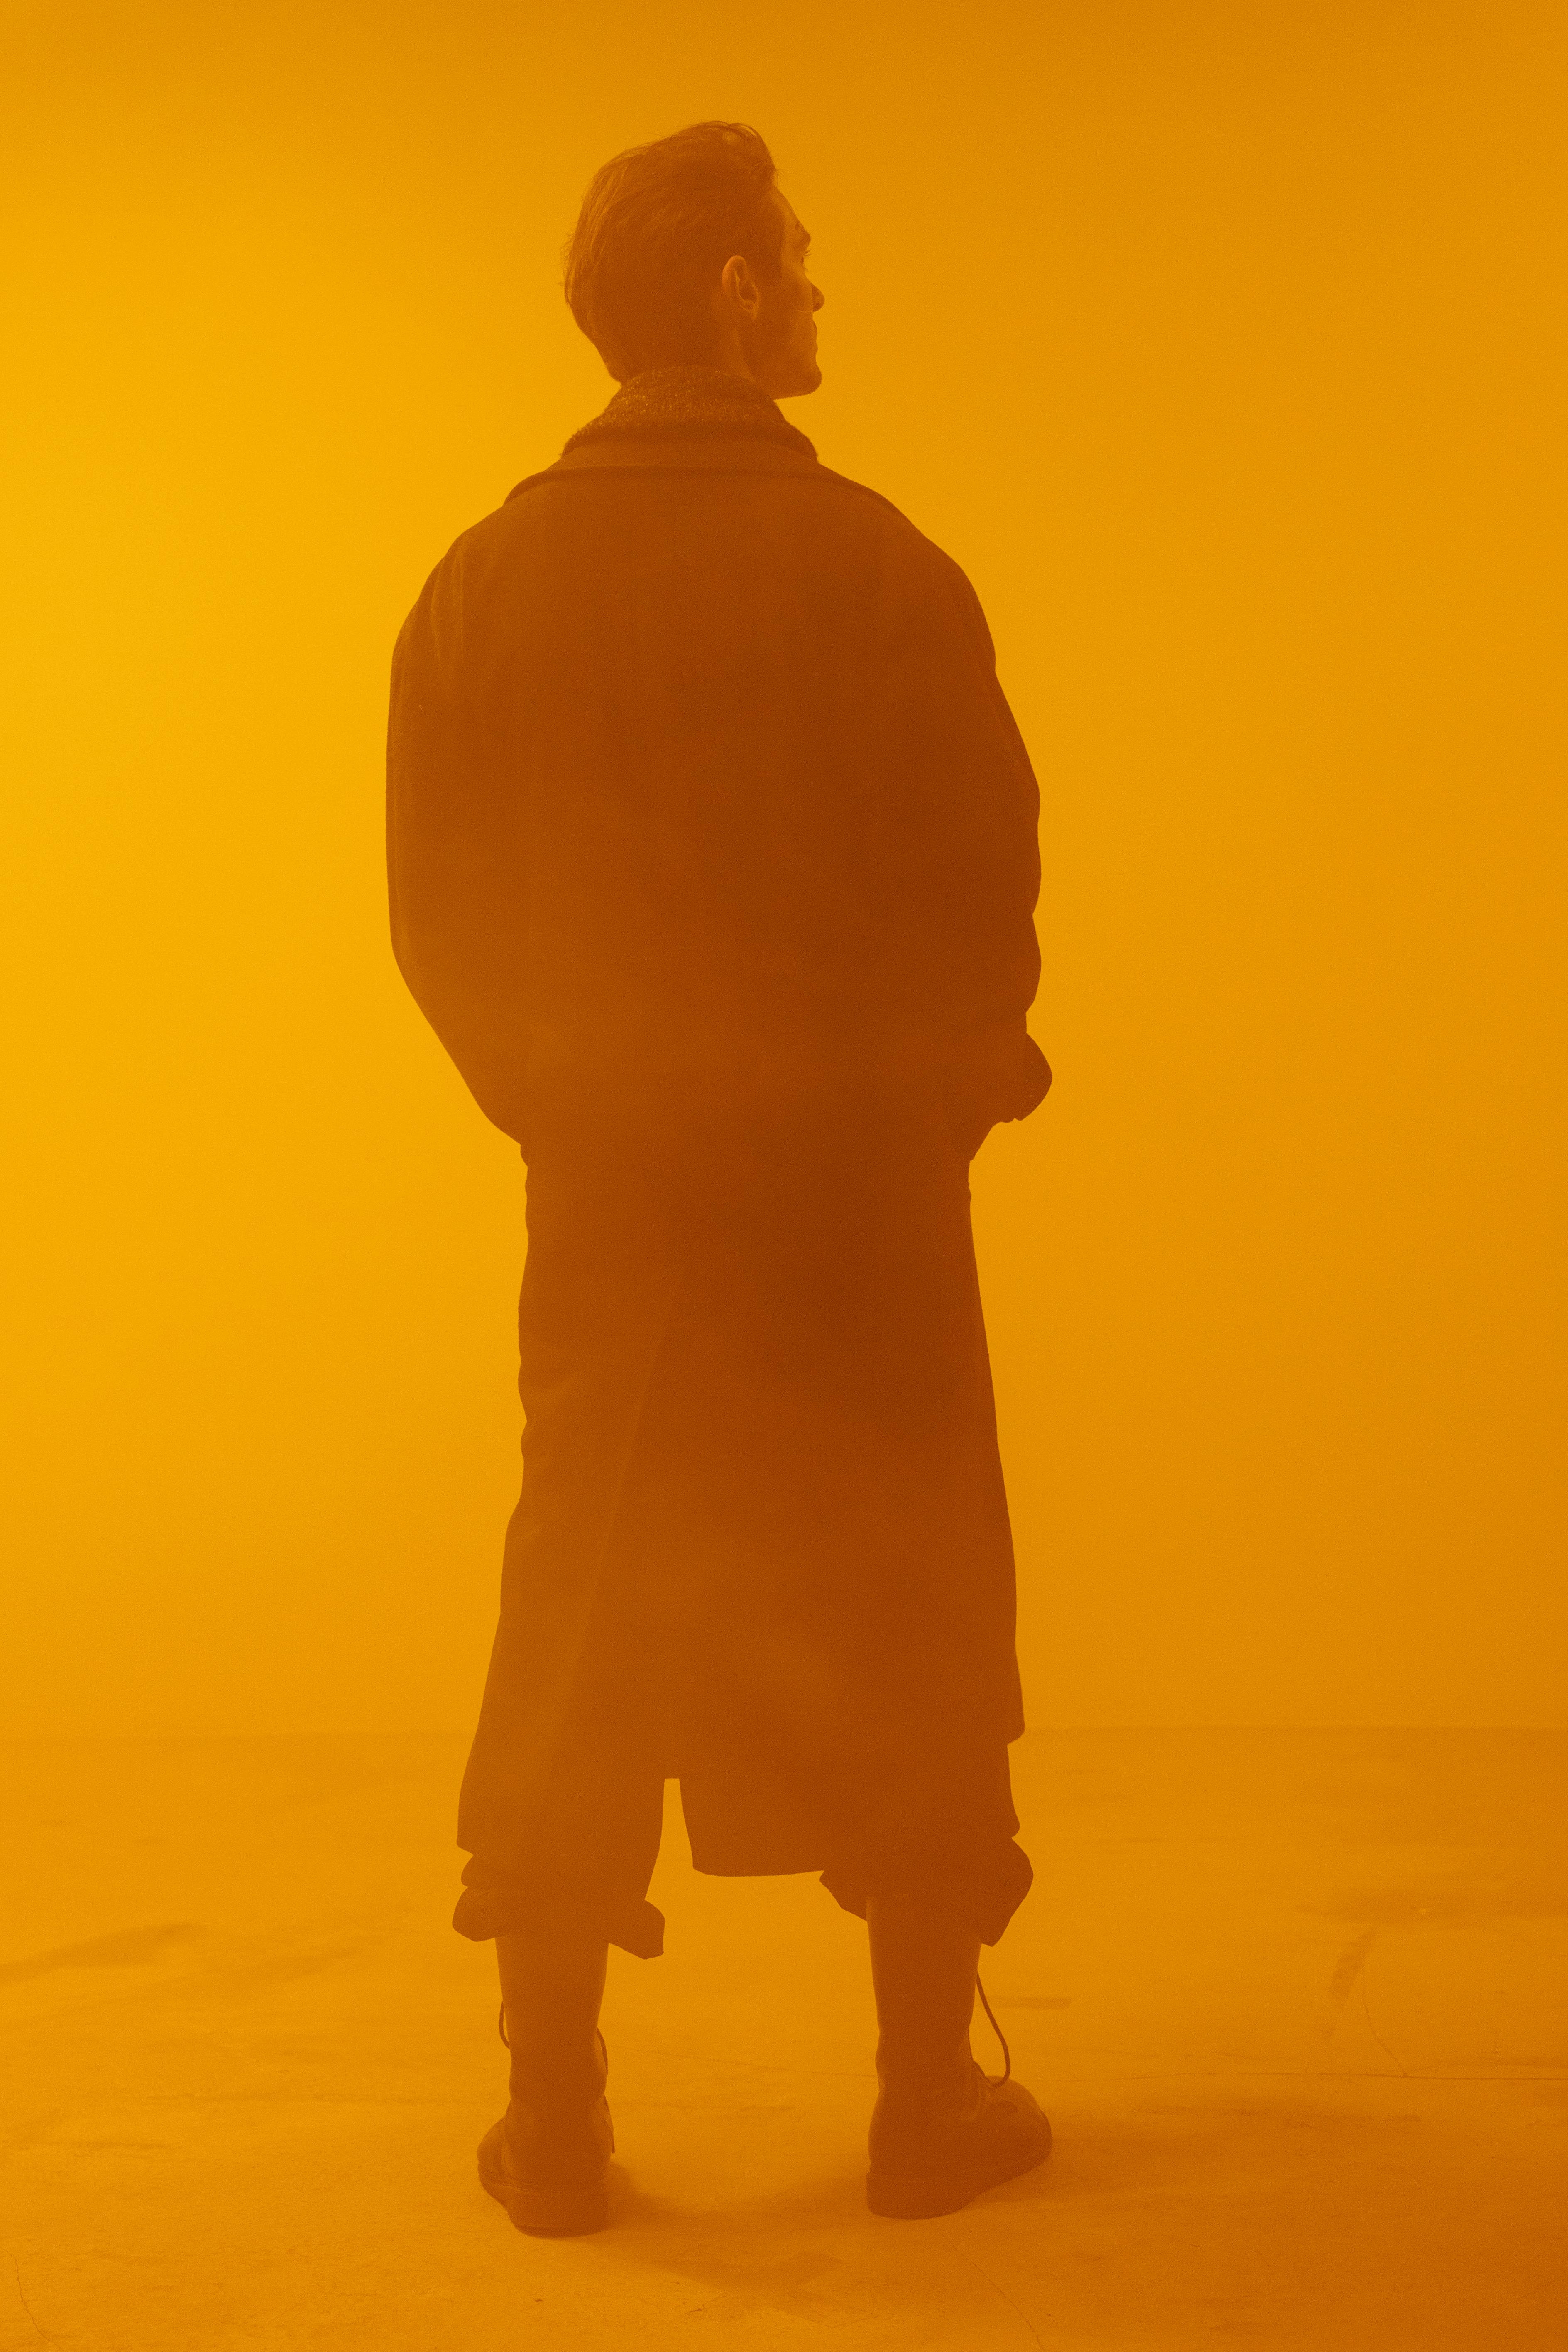 Ryan Gosling Blade Runner 2049 Wallpaper, HD Movies 4K Wallpapers, Images  and Background - Wallpapers Den